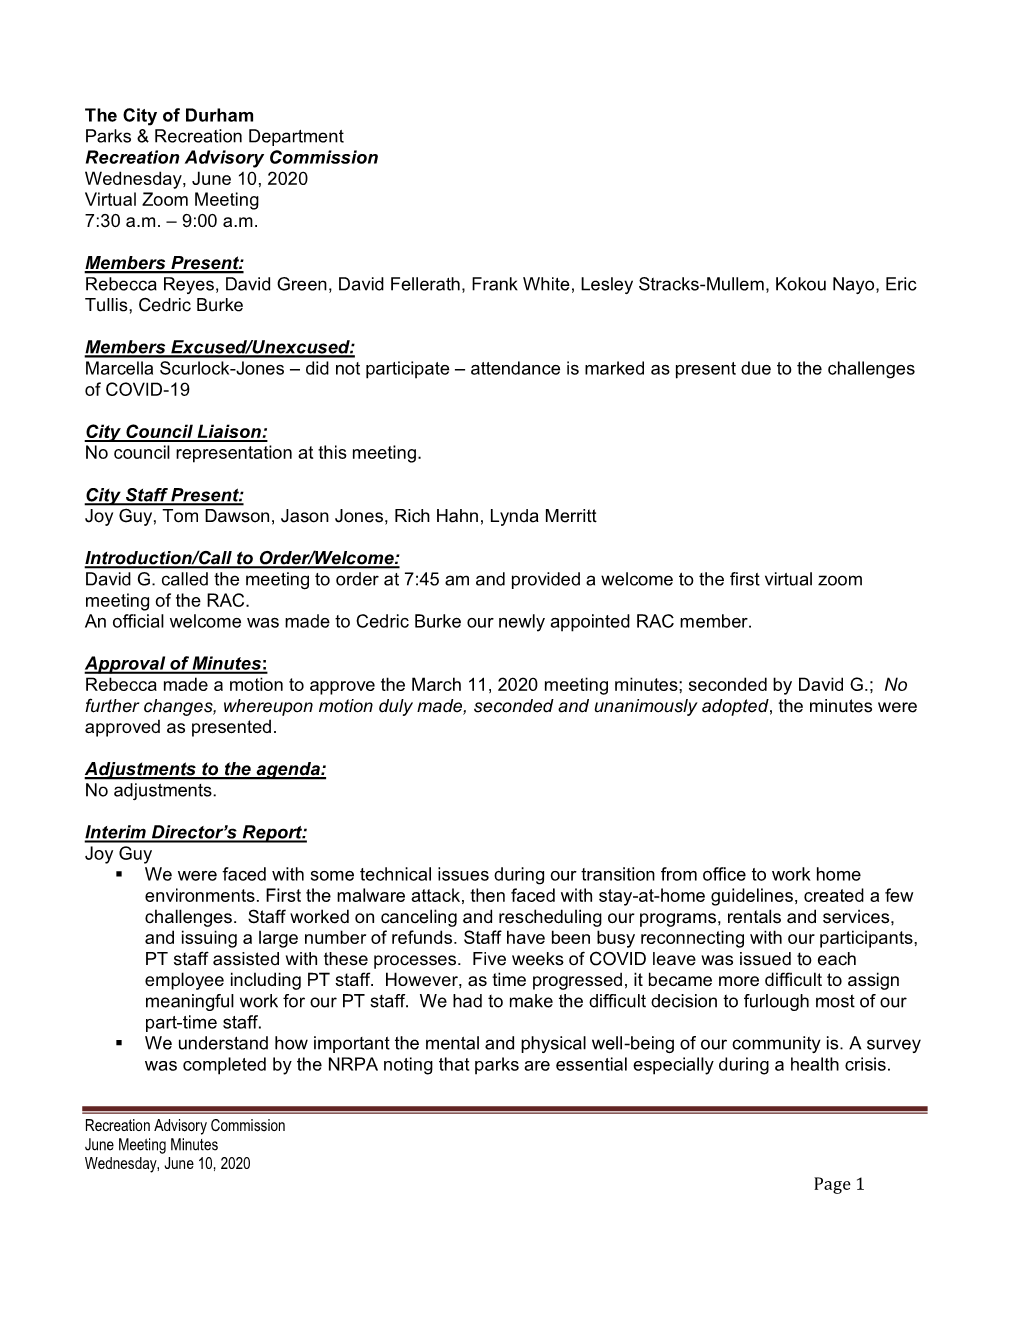 Page 1 the City of Durham Parks & Recreation Department Recreation Advisory Commission Wednesday, June 10, 2020 Virtual